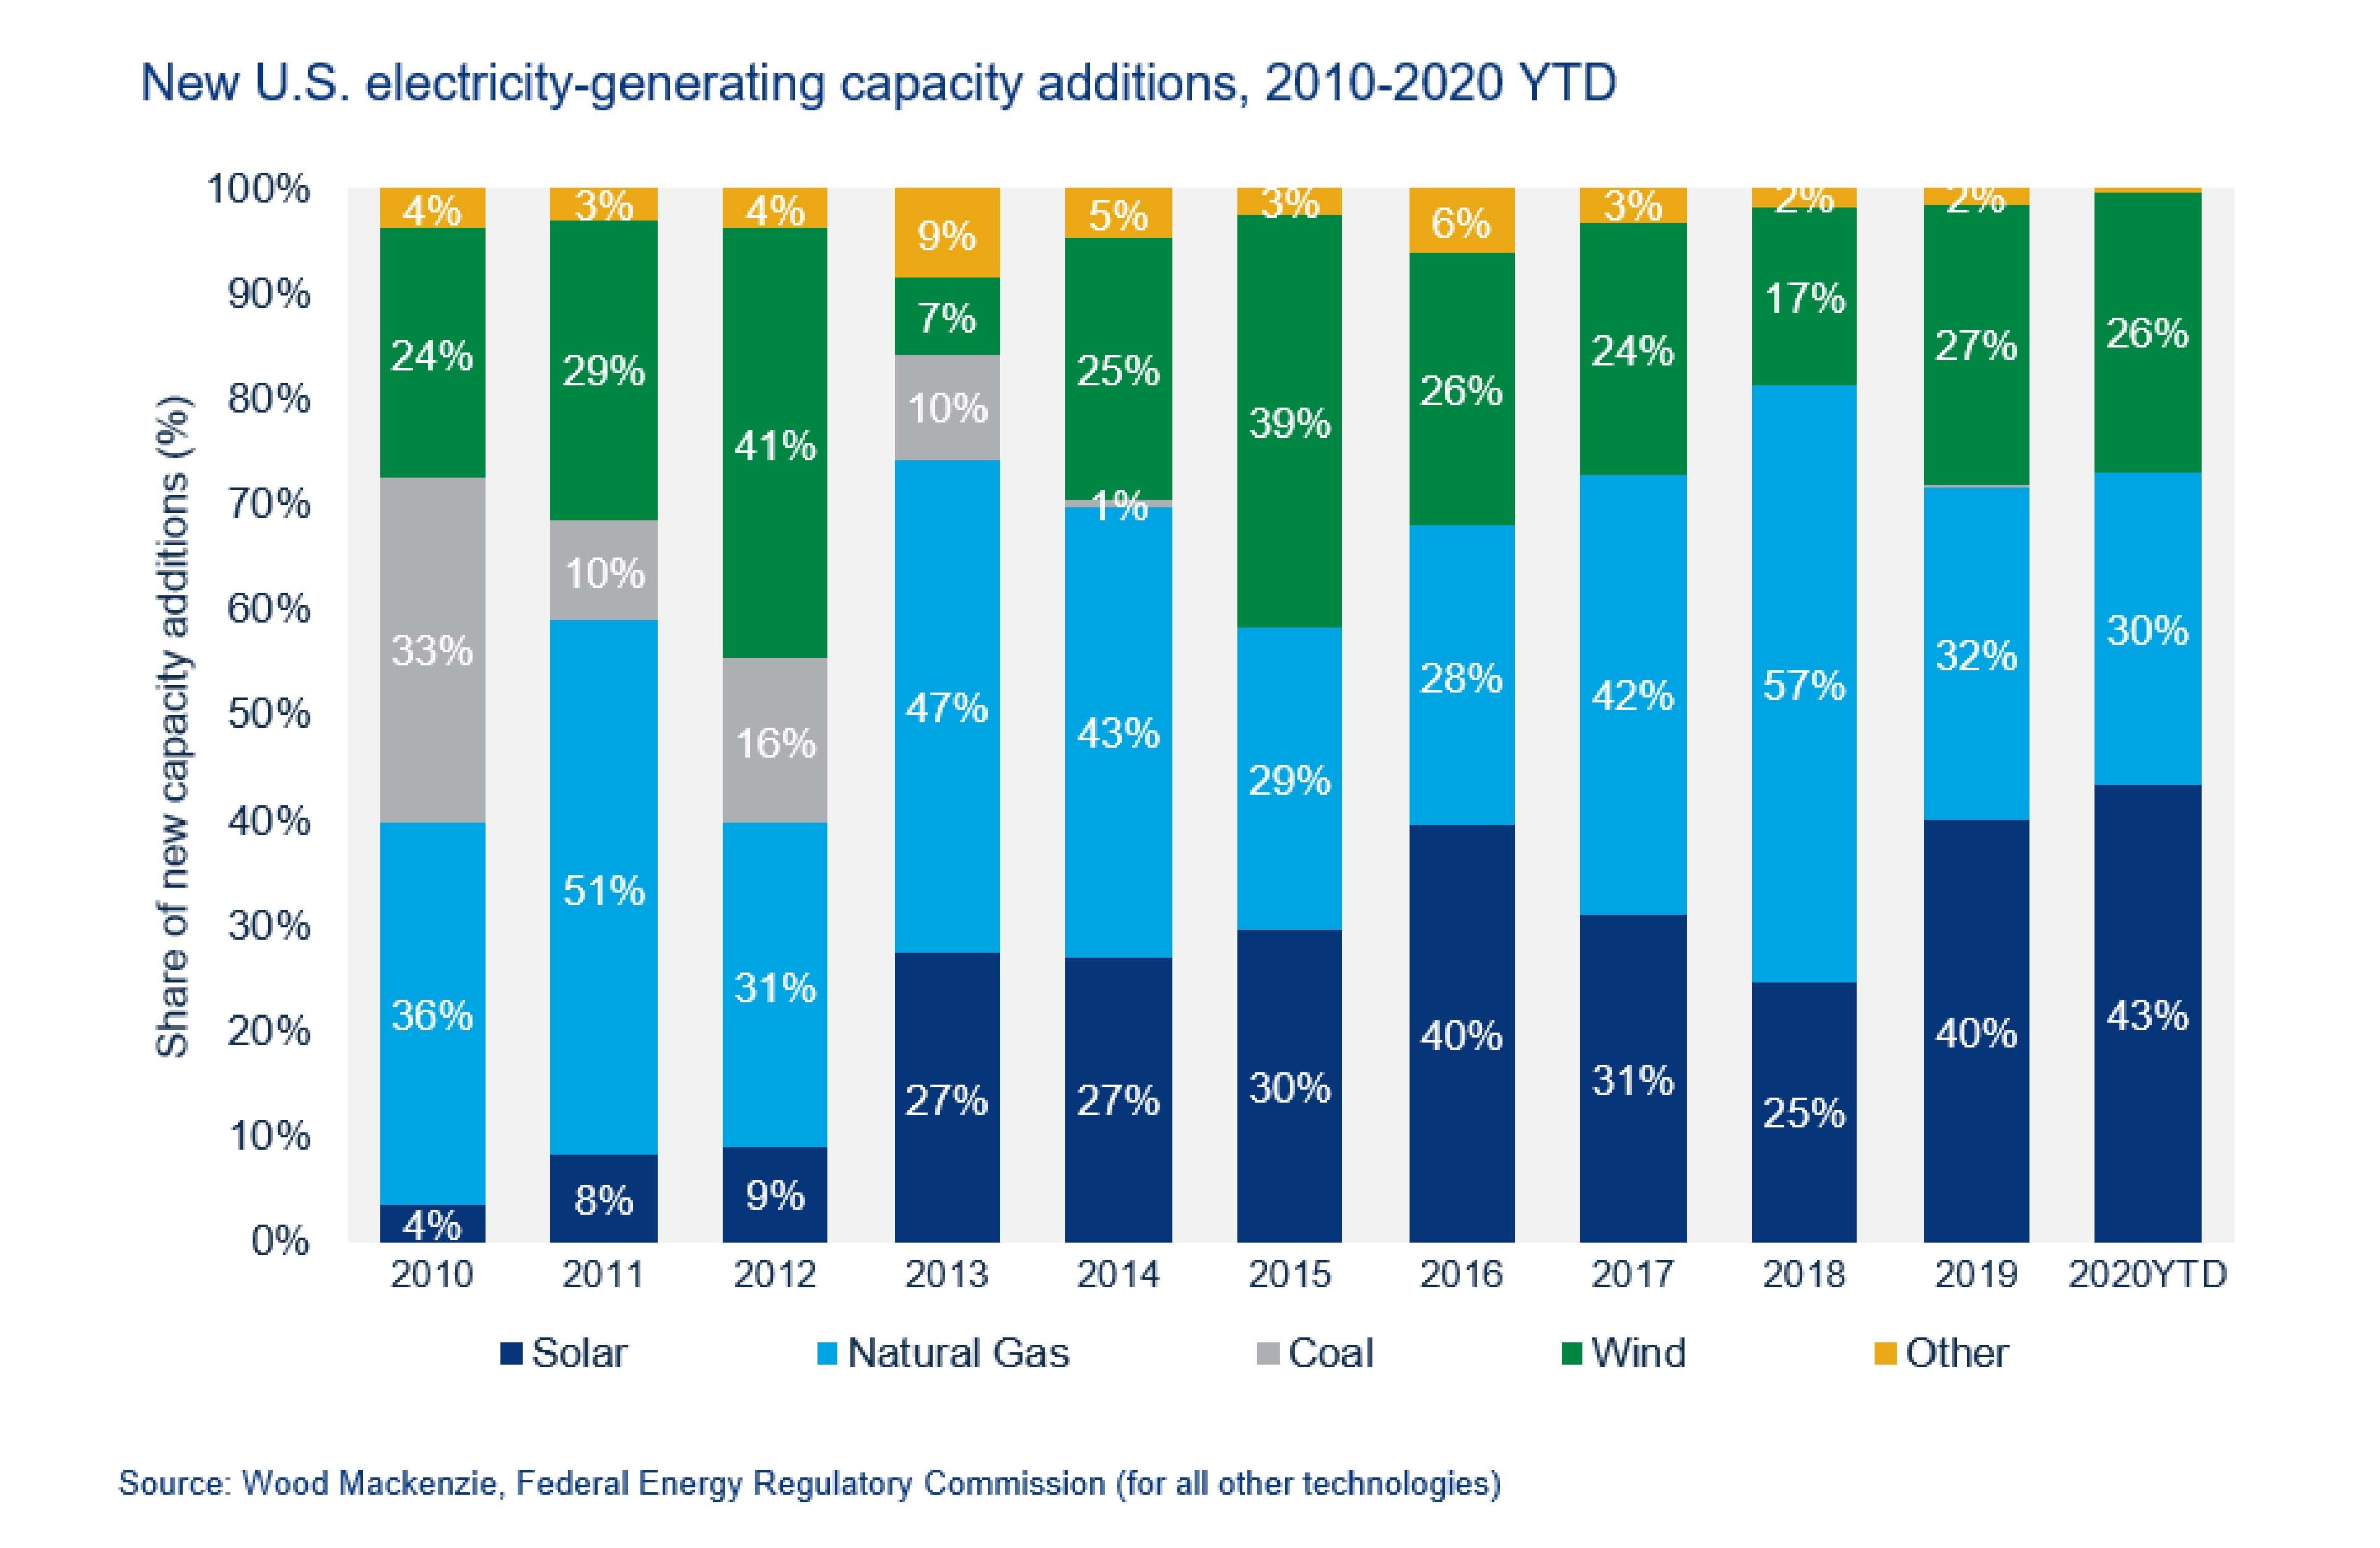 United States Electricity-Generating Capacity Additions 2010-2020_SEIA